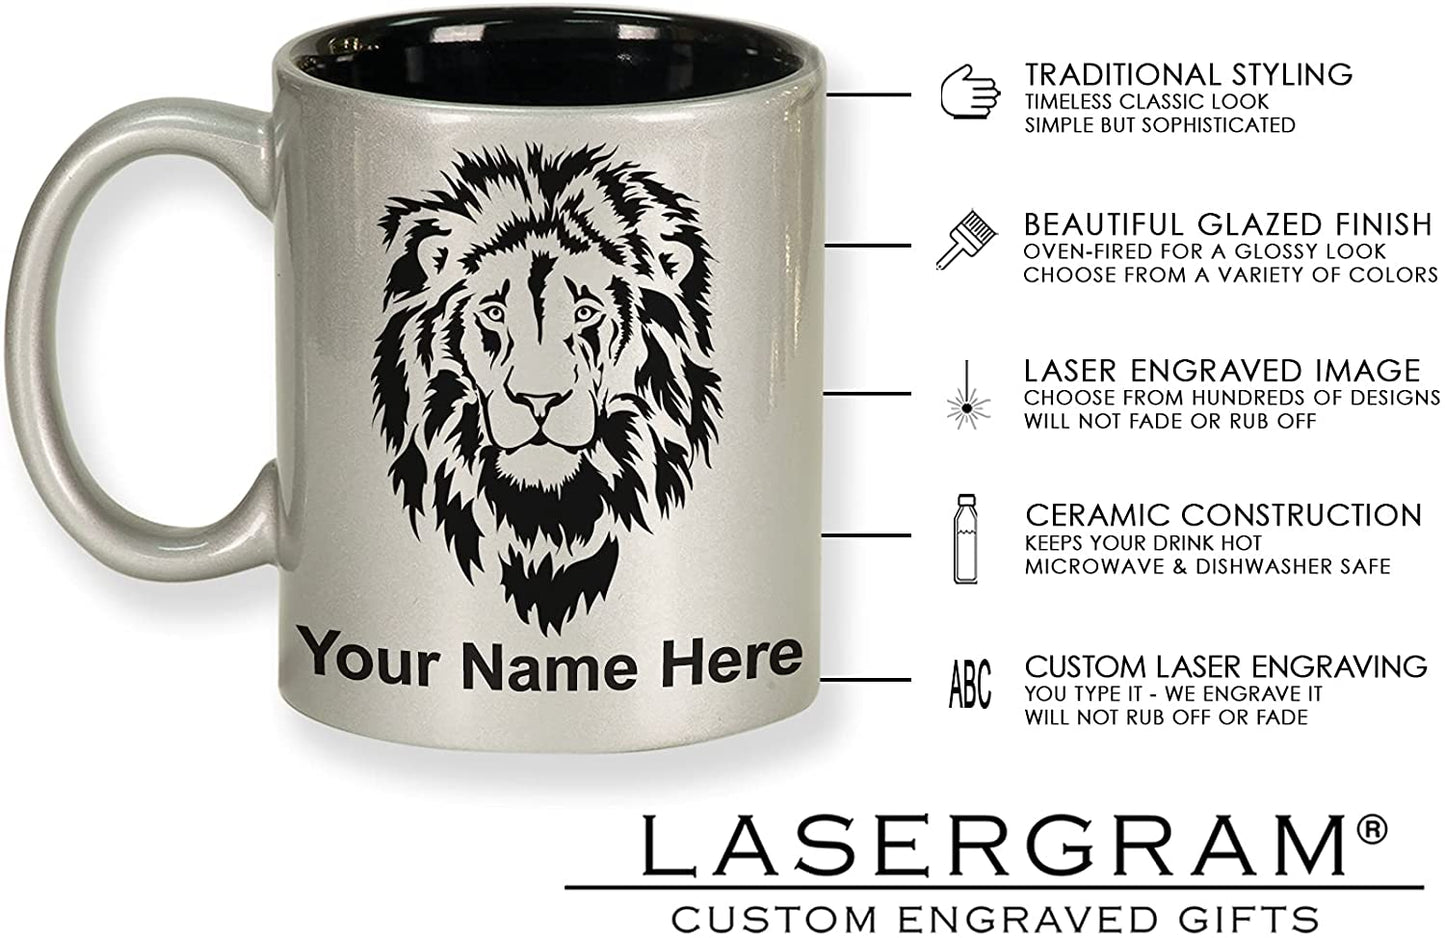 11oz Round Ceramic Coffee Mug, Hair Stylist, Personalized Engraving Included